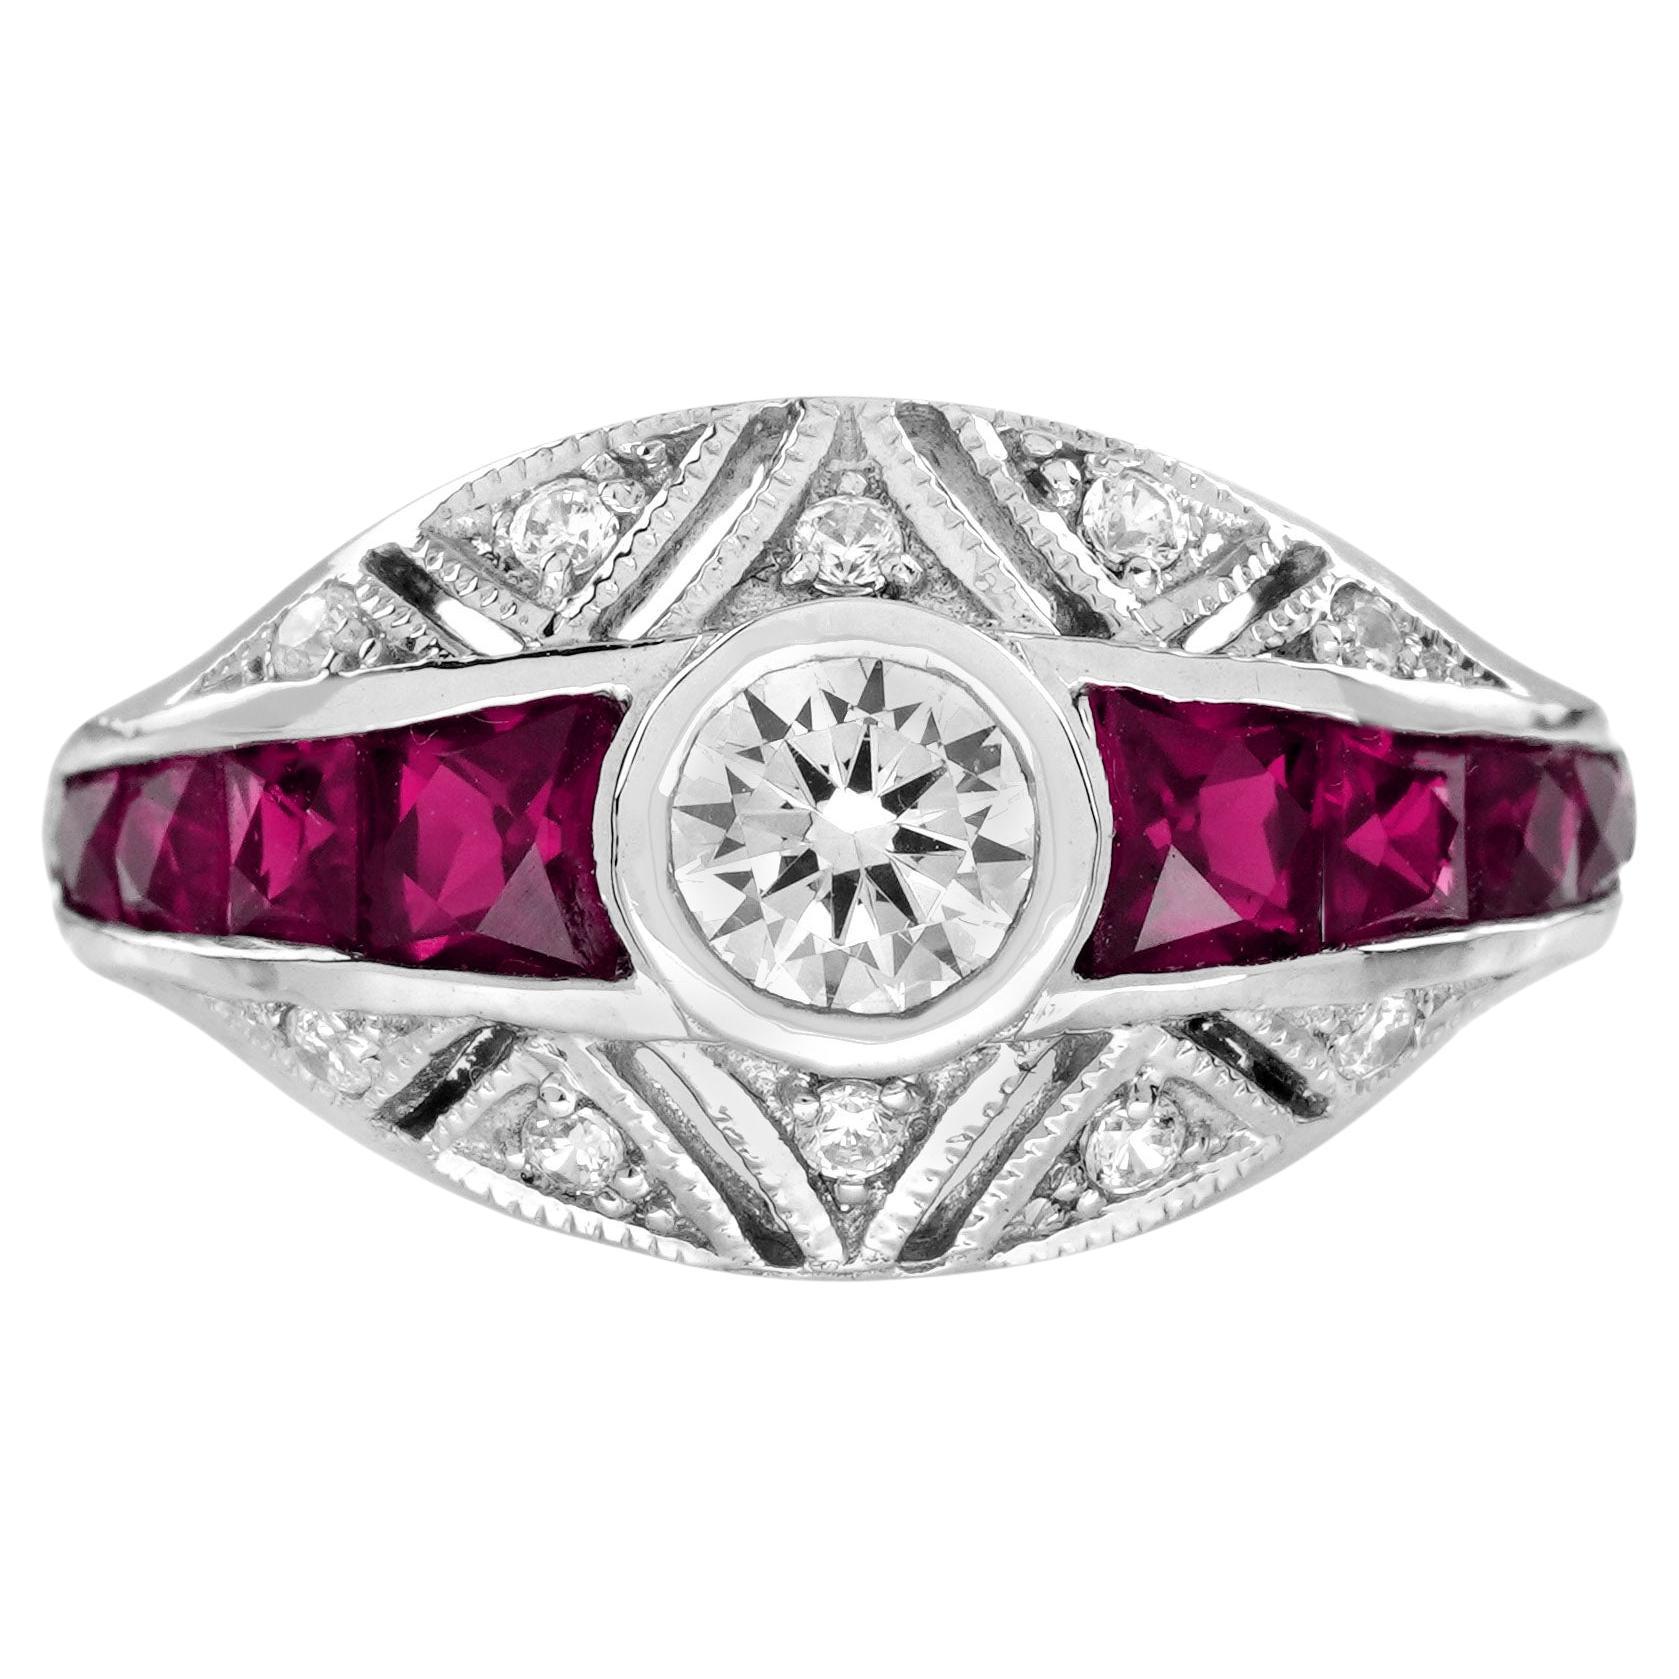 Diamond and Ruby Art Deco Style Bombay Ring in 18K White Gold For Sale